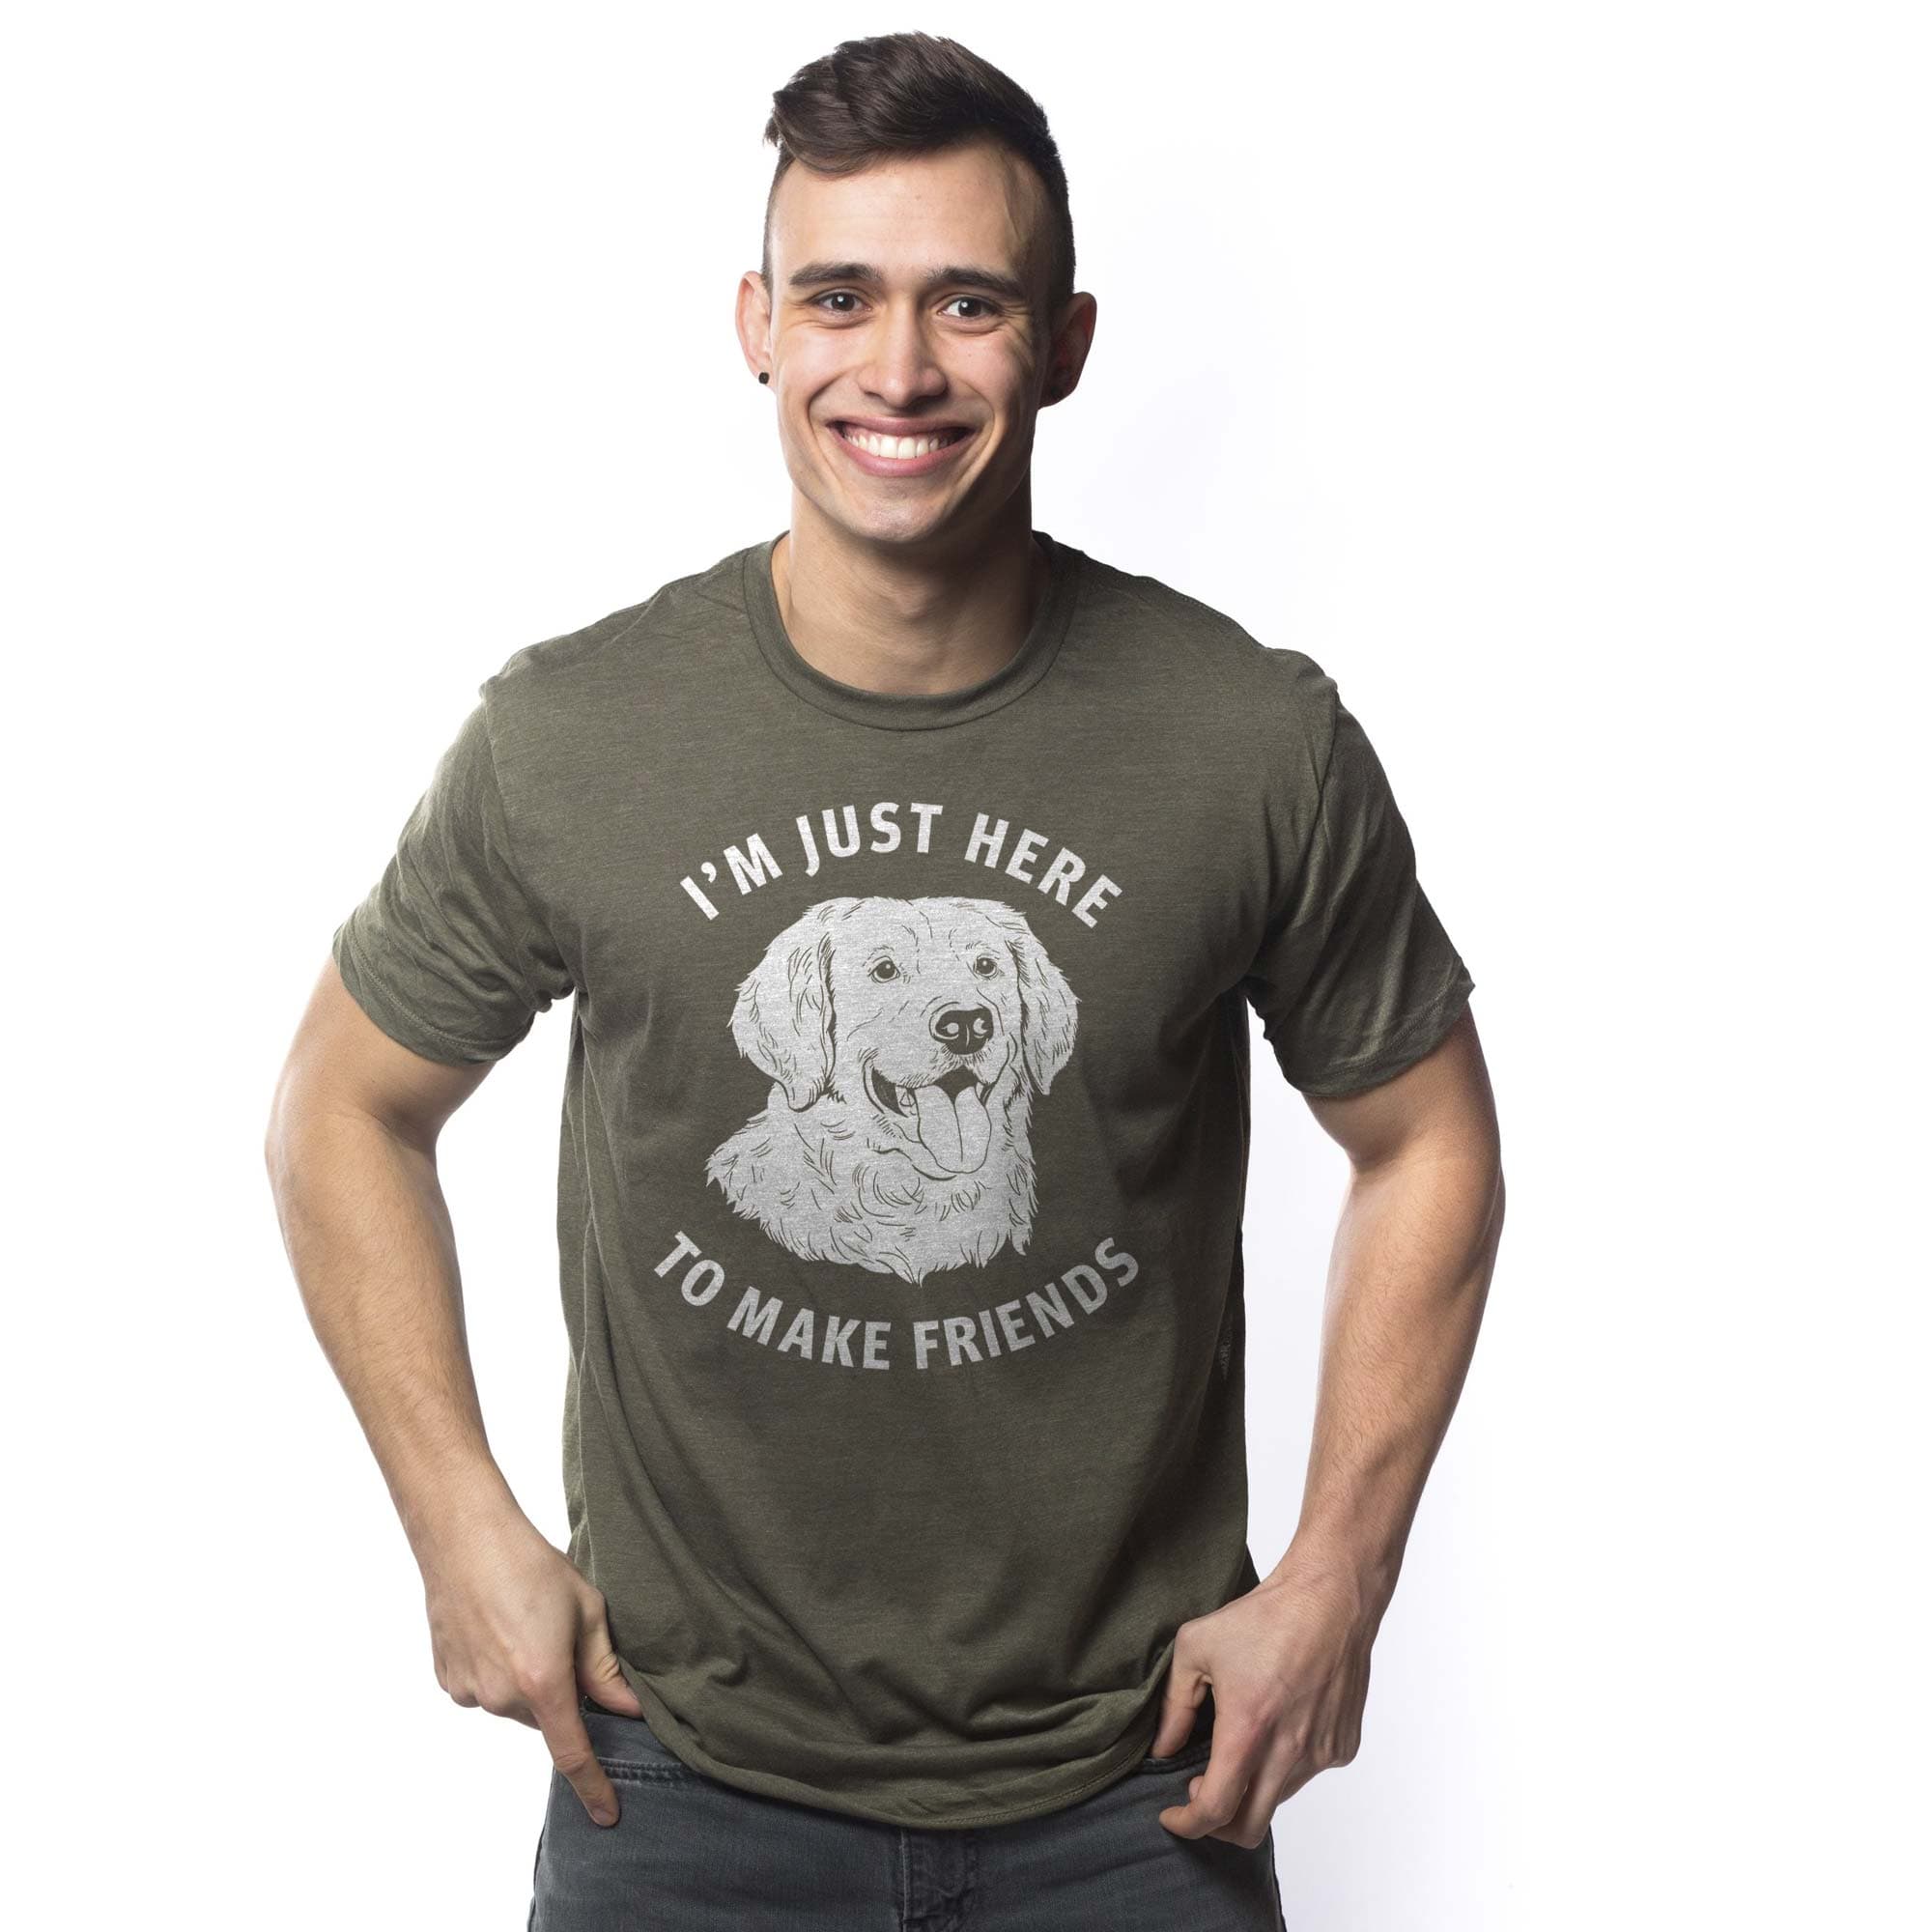 Men's Just Here To Make Friends Funny Graphic T-Shirt | Vintage Golden Retriever Tee | Solid Threads